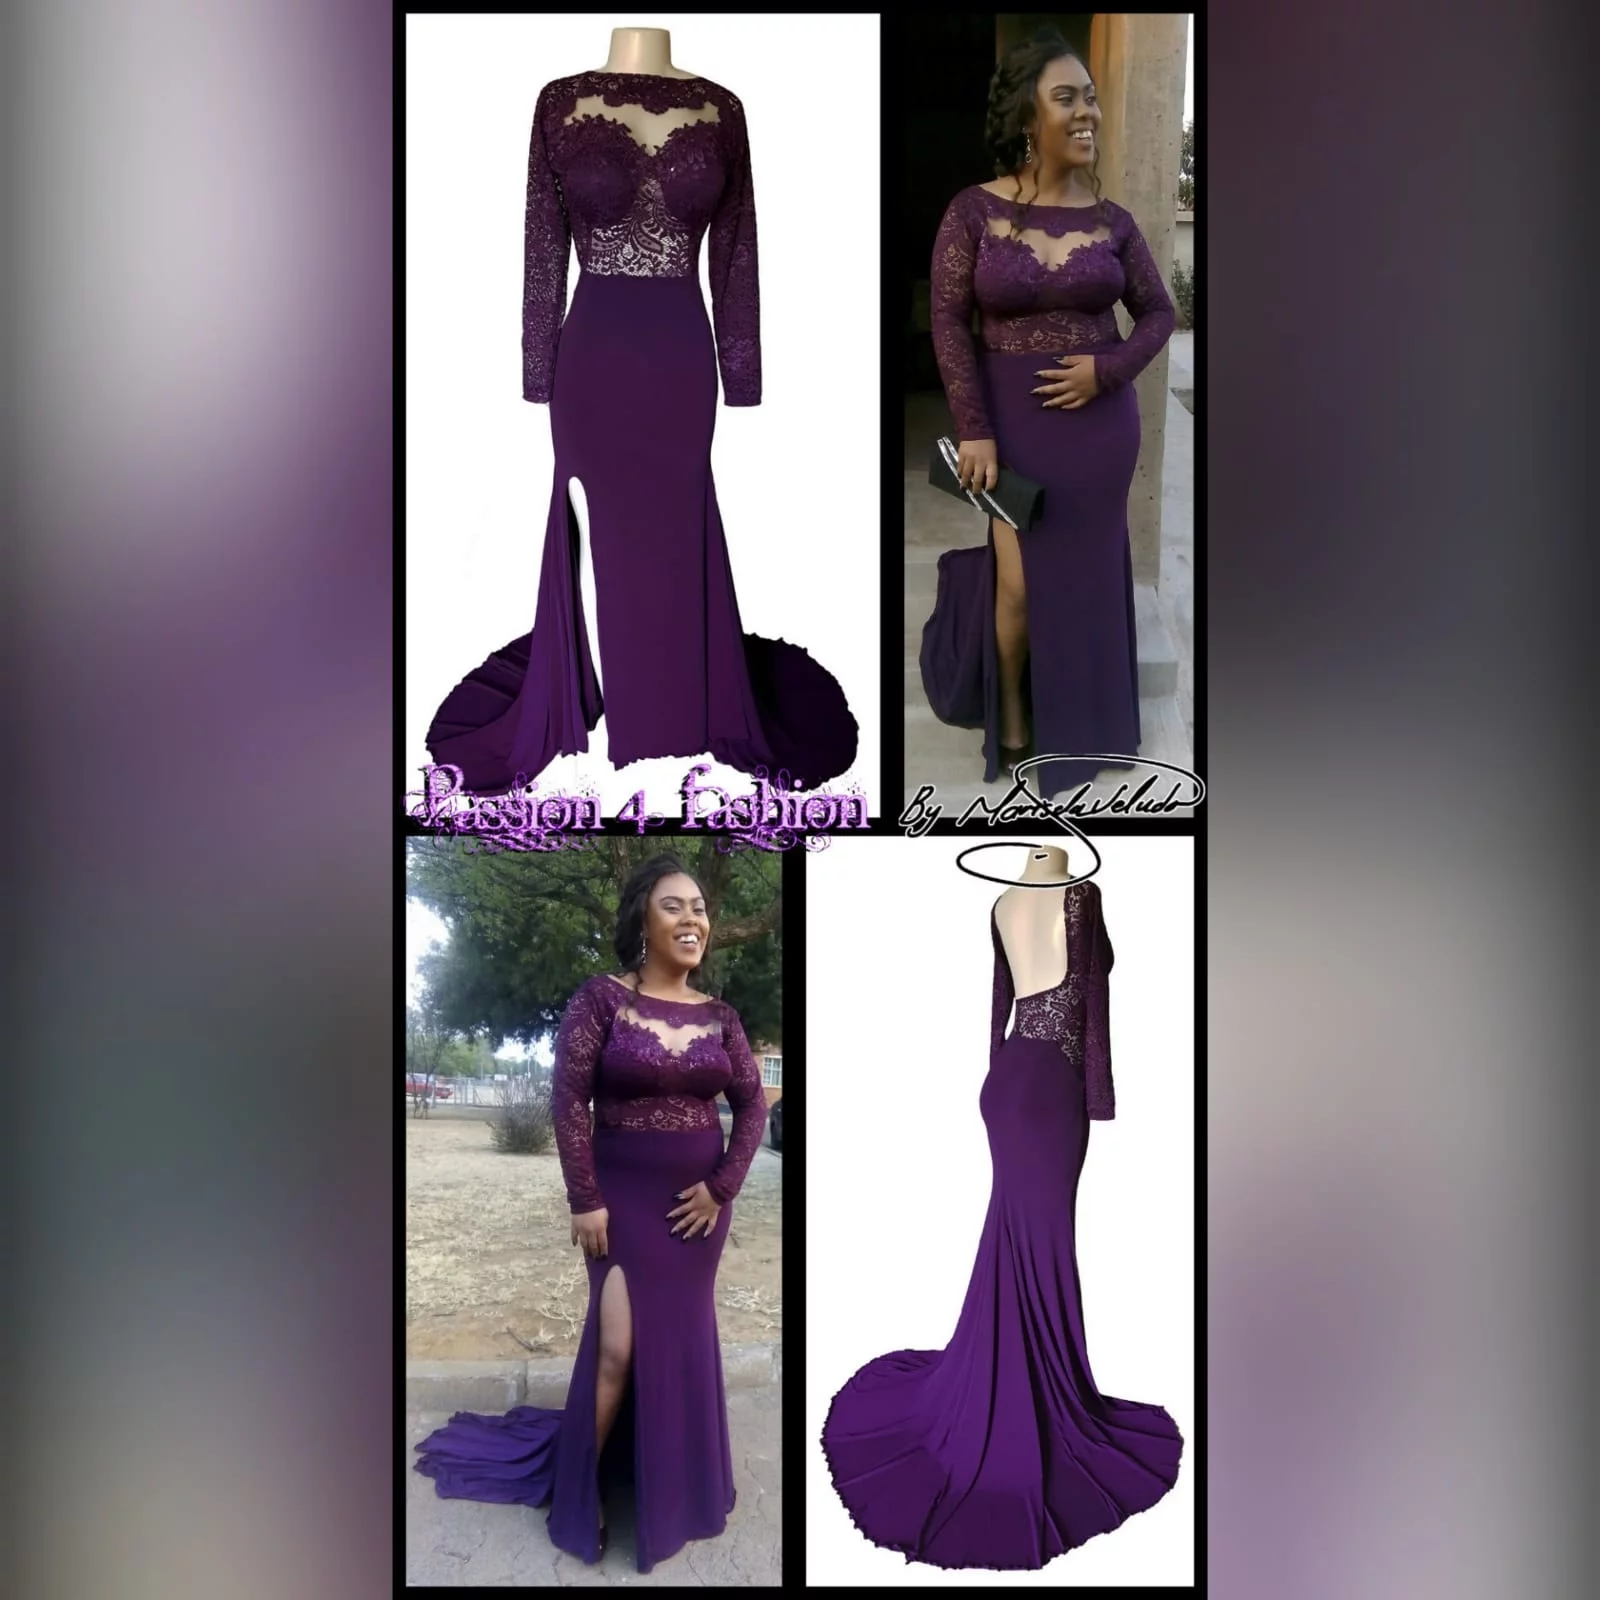 Plum lace bodice soft mermaid prom dress 2 plum lace bodice, soft mermaid prom dress with a low open rounded open back and hip lace design. With long lace sleeves and a long train.